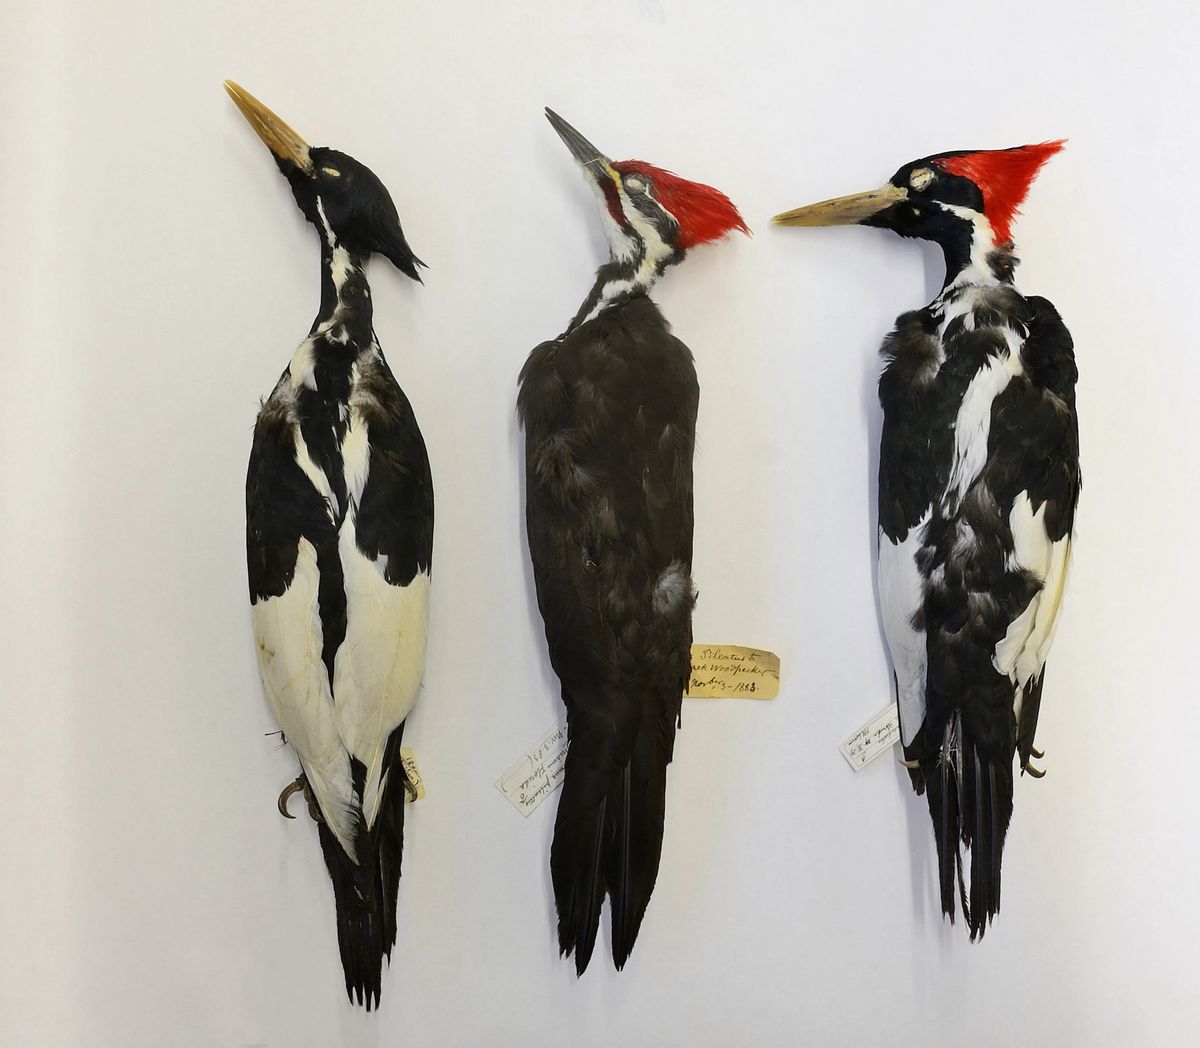 ivory billed woodpecker male extincy on right and female on left with pileated woodpecker male in middle closest confusion species british museum tring